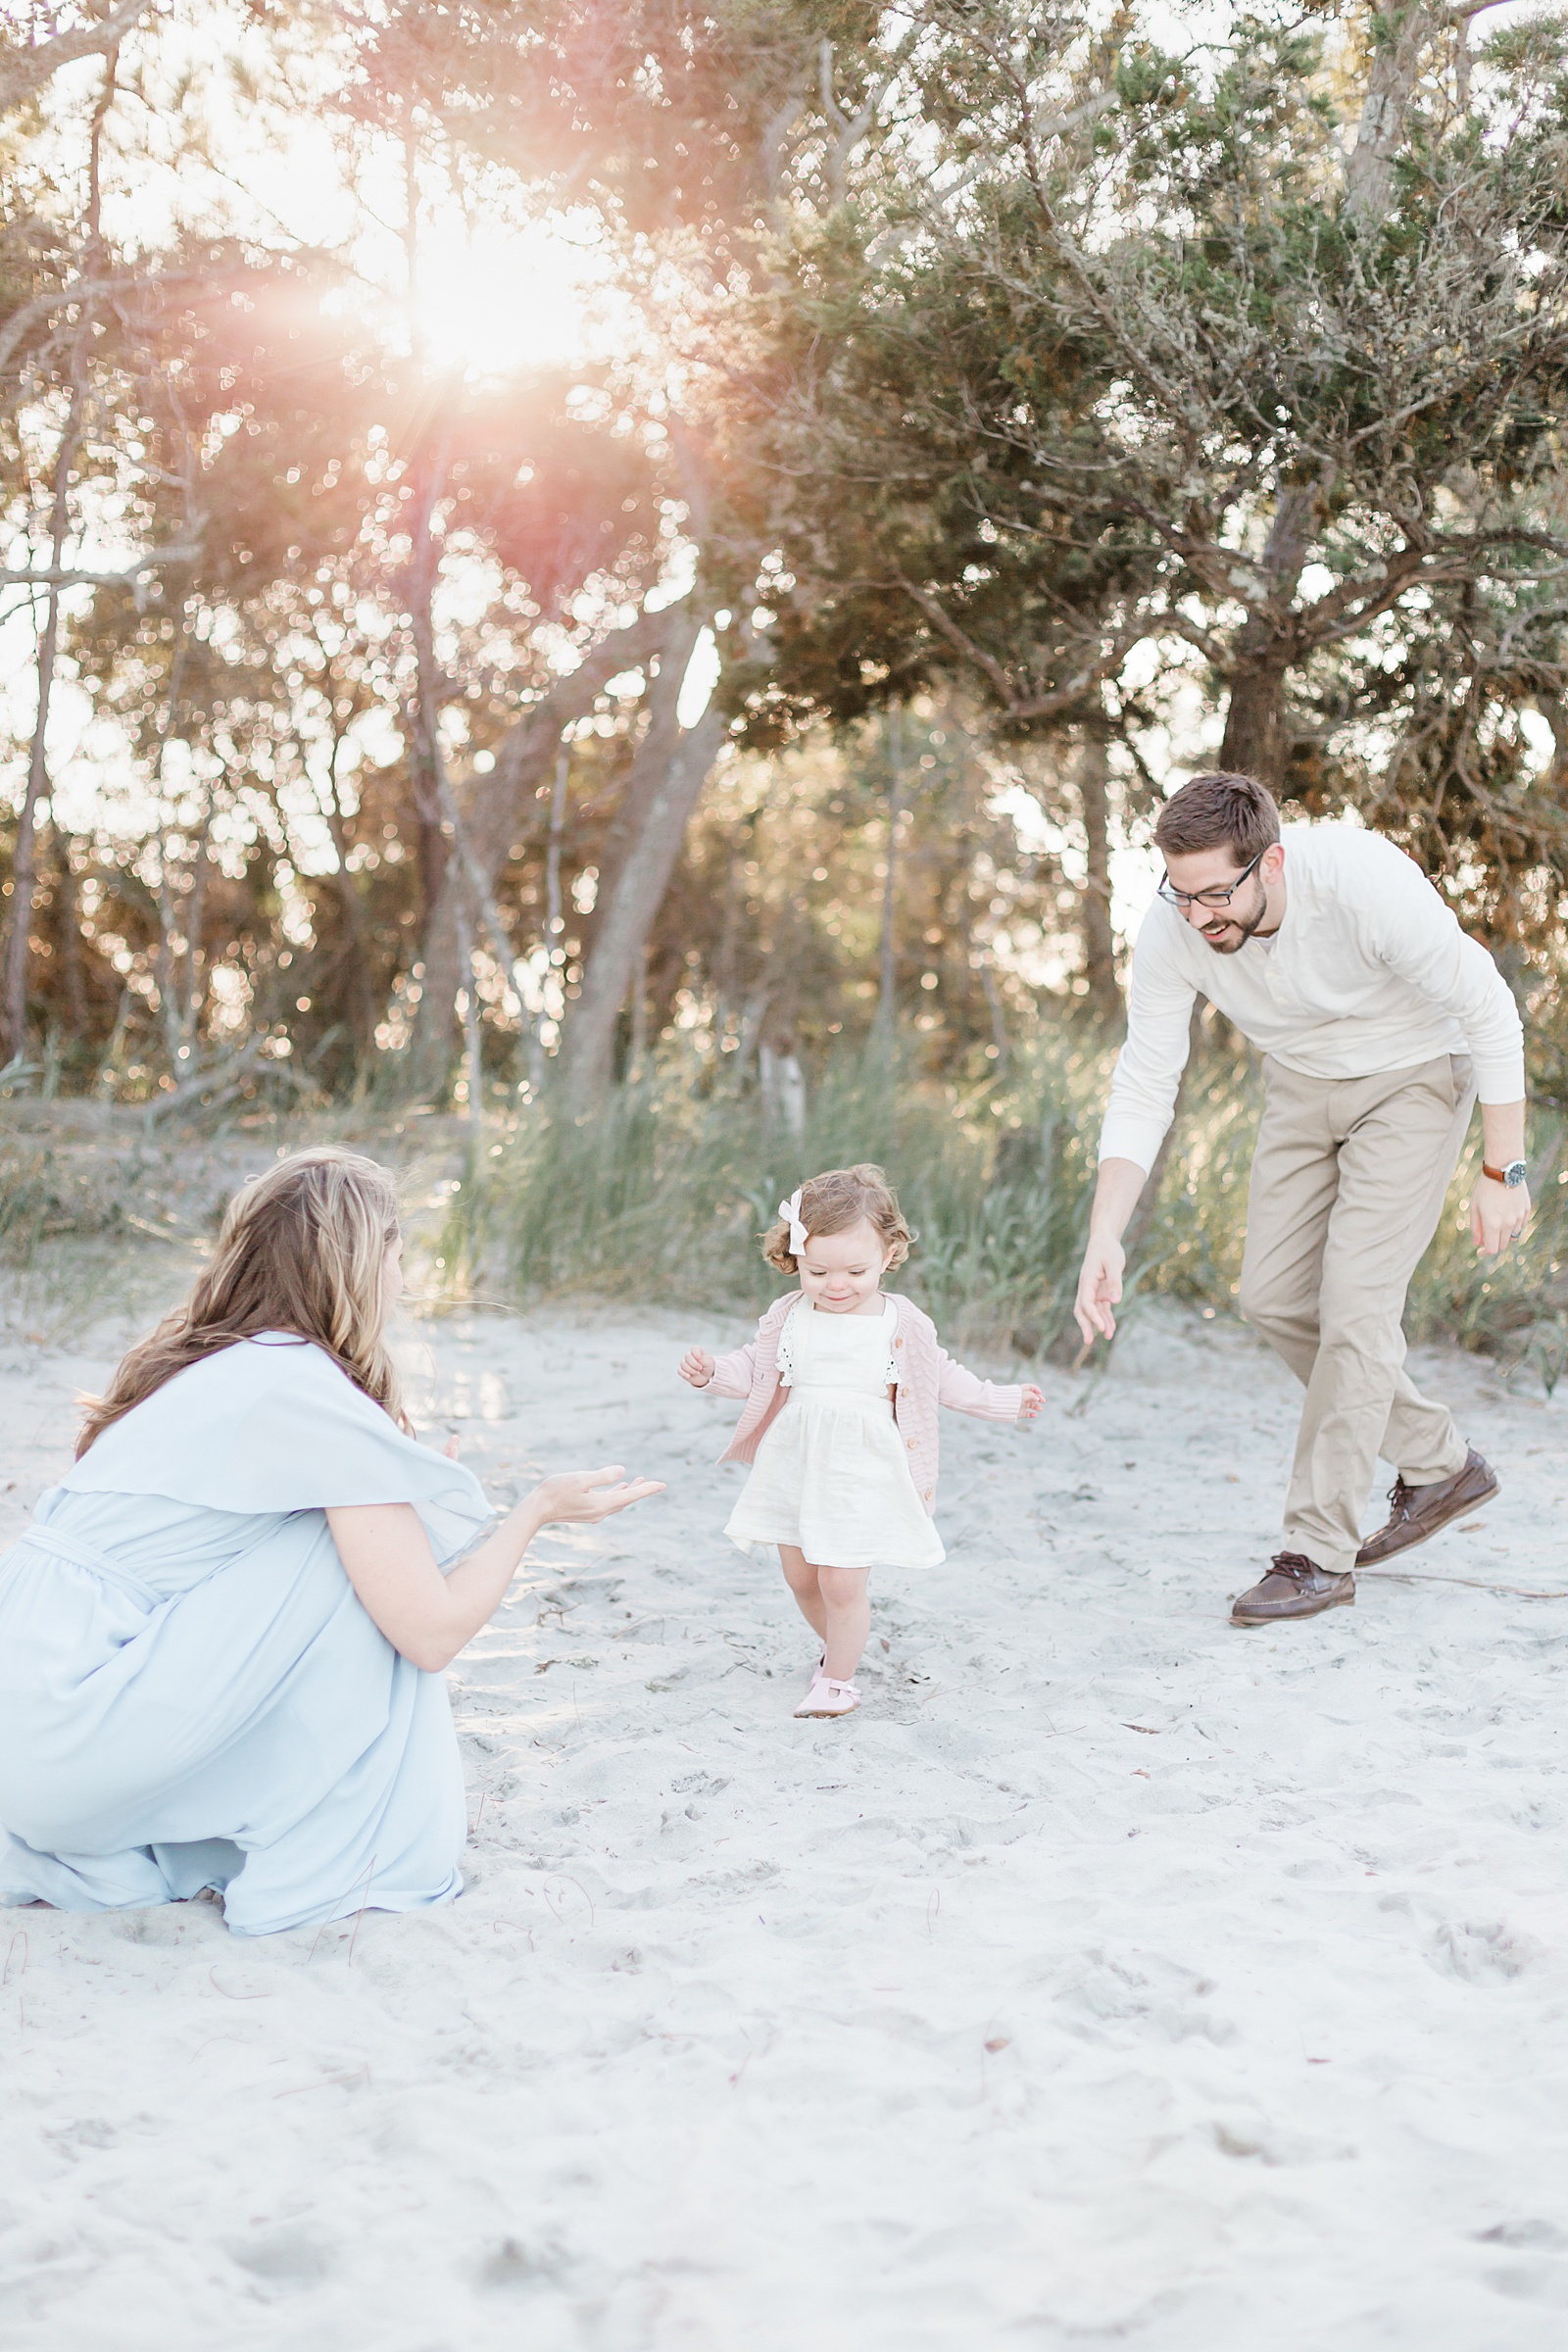 Lifestyle family session on Folly Beach outside of Charleston, SC | Caitlyn Motycka Photography